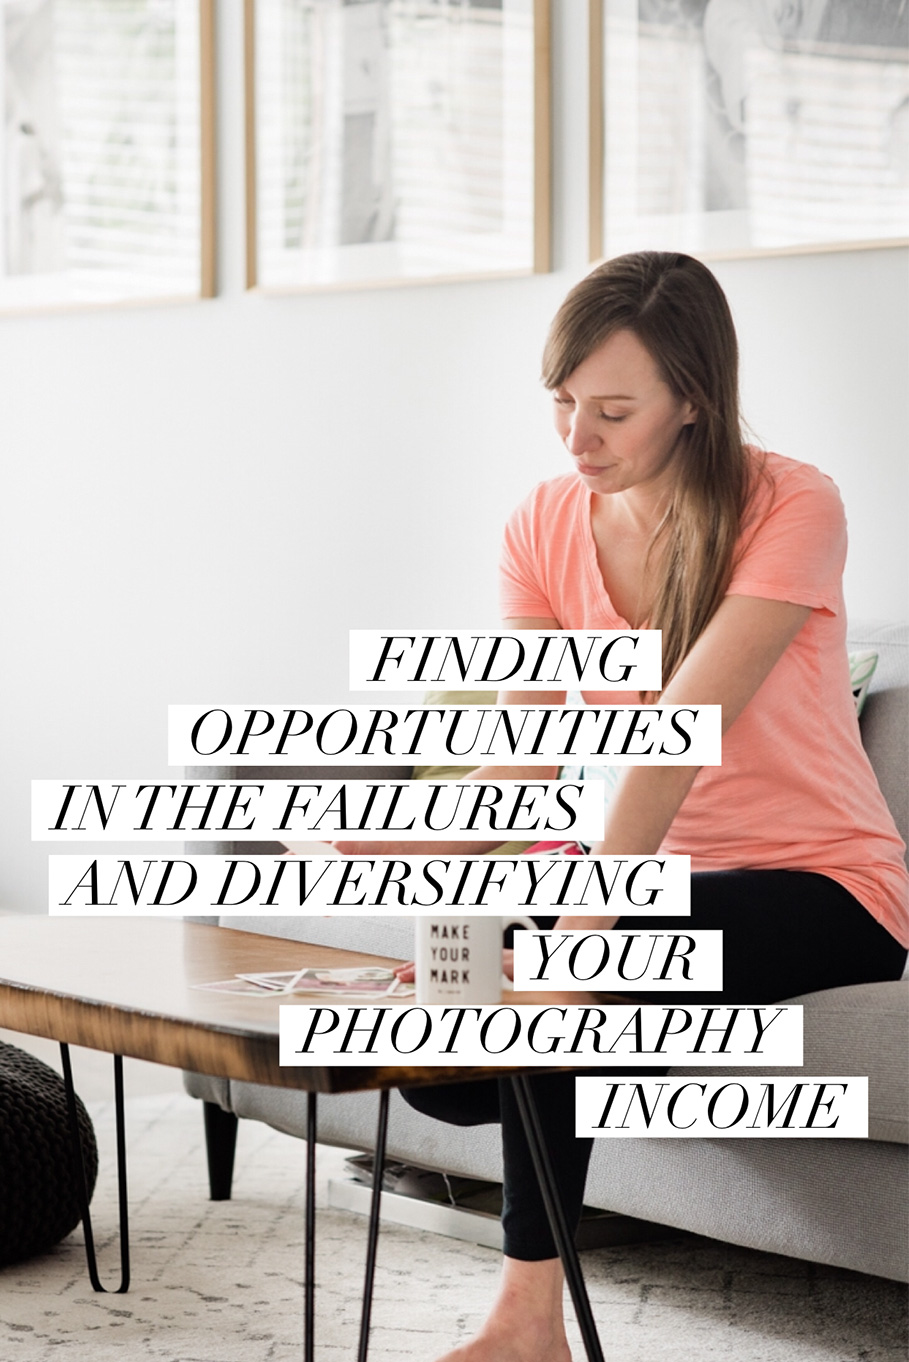 Finding opportunities in the failures and diversifying your photography income with john greengo